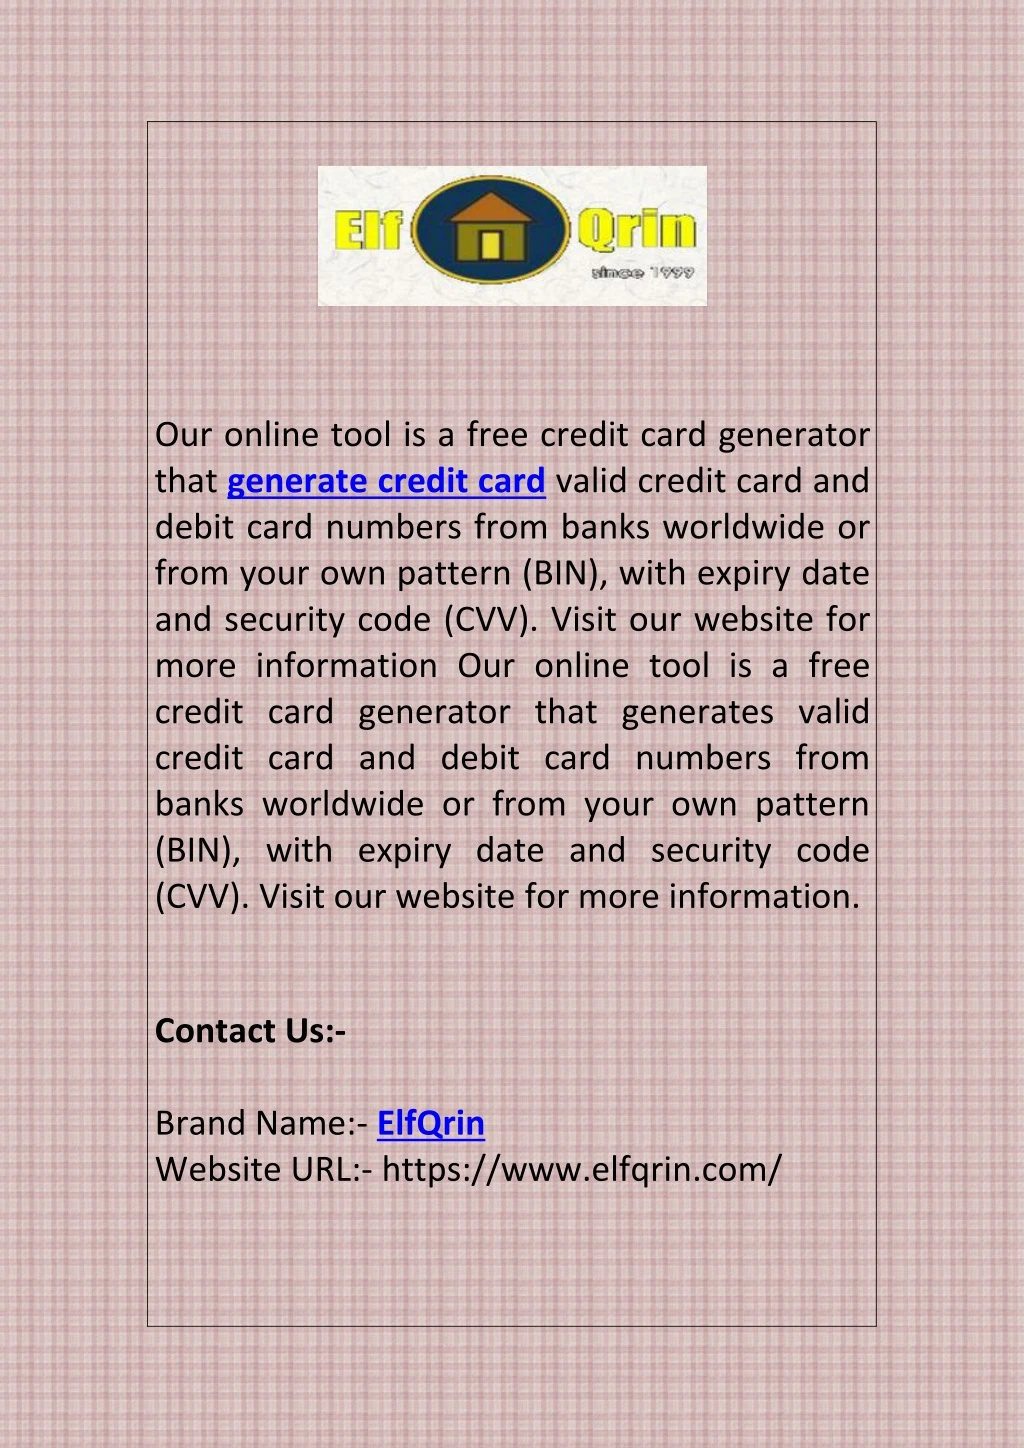 our online tool is a free credit card generator